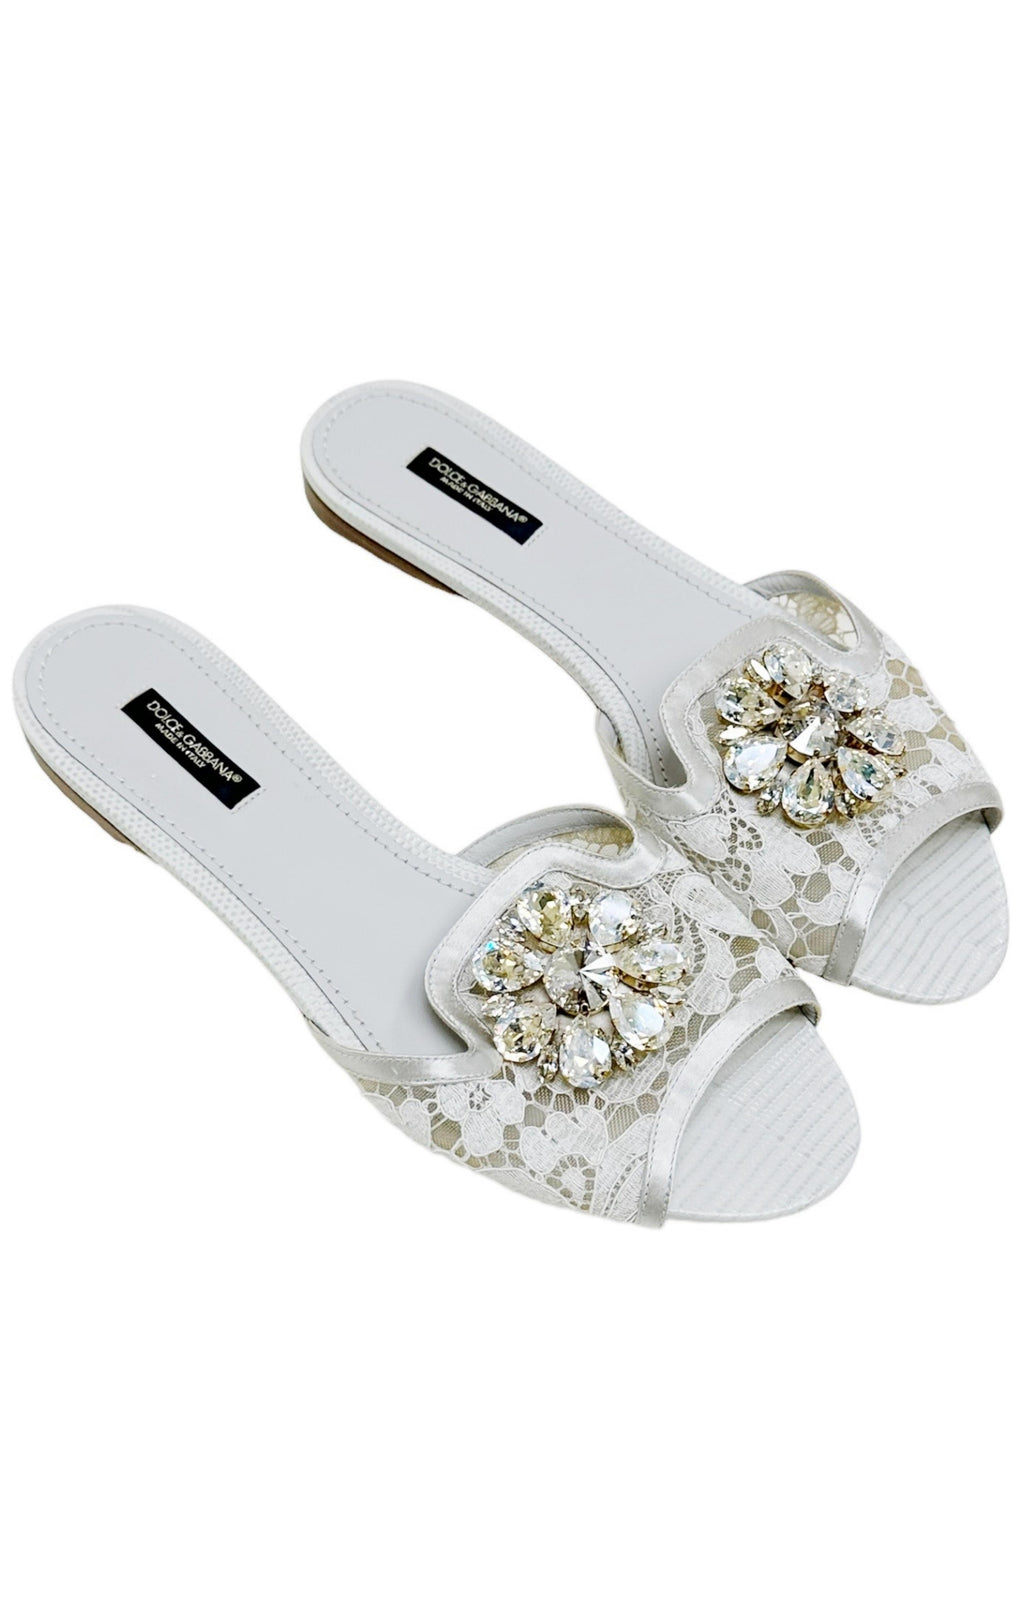 DOLCE & GABBANA (NEW) Sandals Size: EUR 39 / Fits like US 9